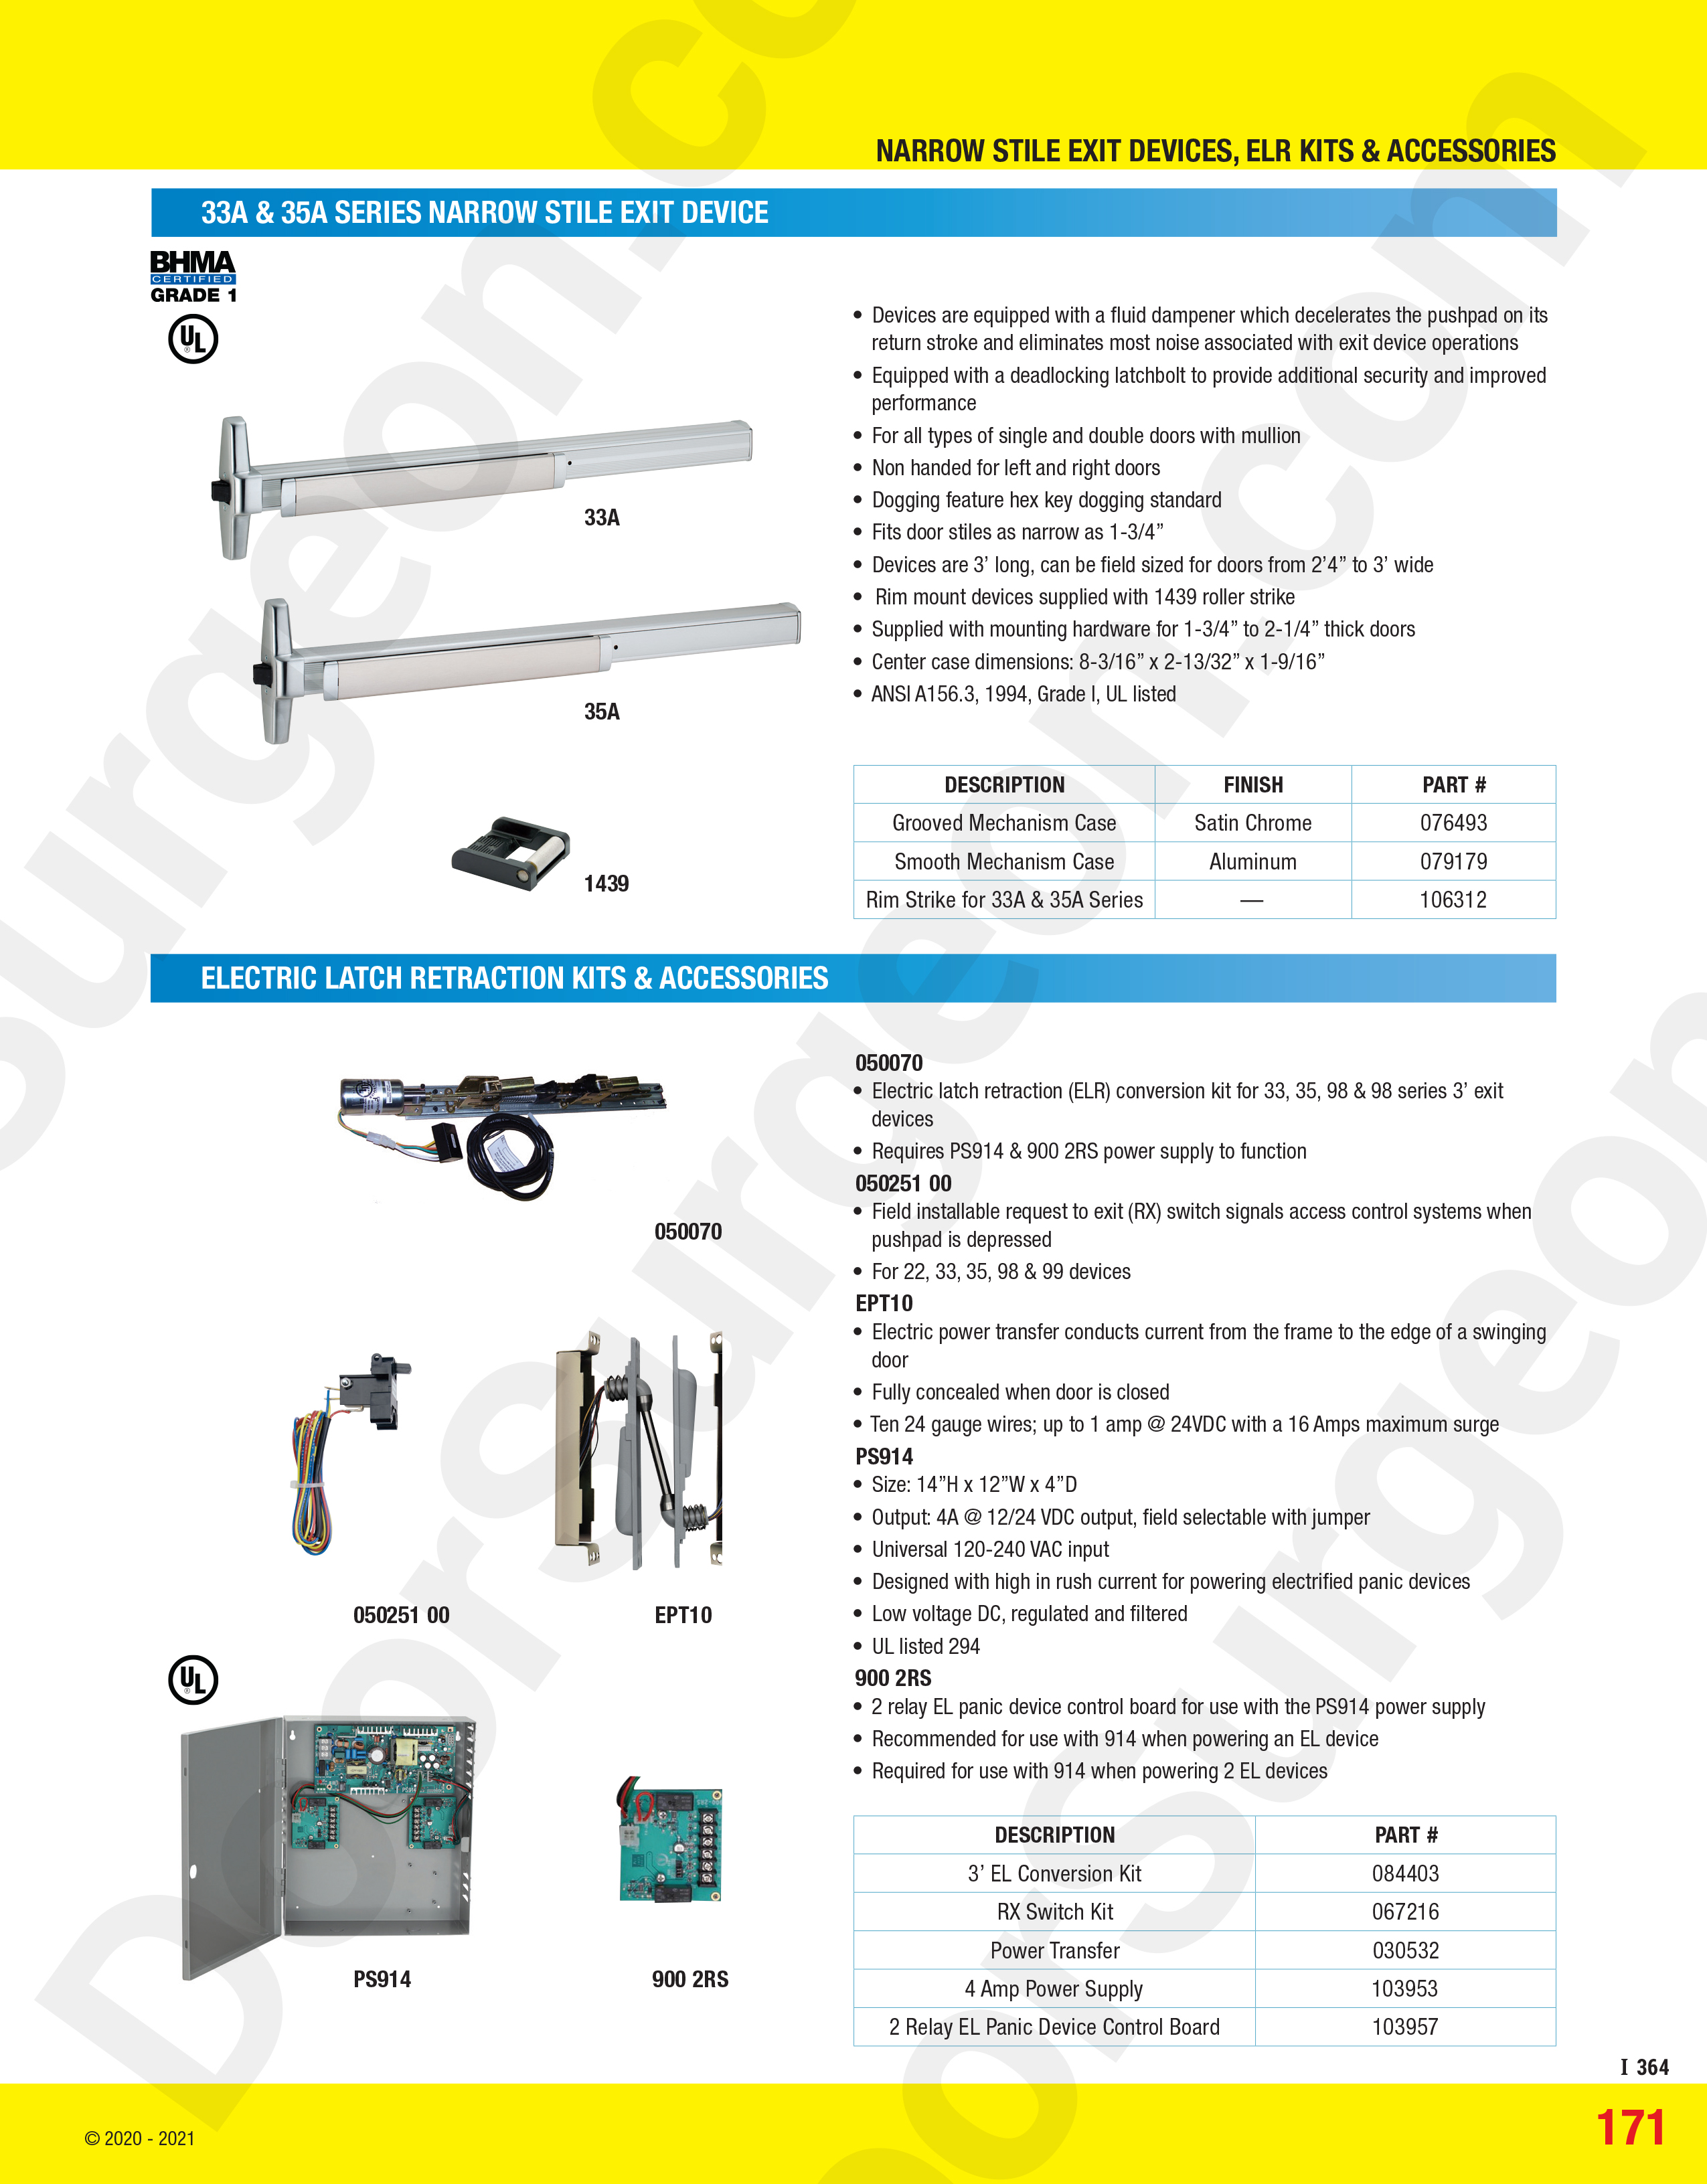 Von Duprin Narrow Stile exit devices, electronic latch retraction kits and accessories.